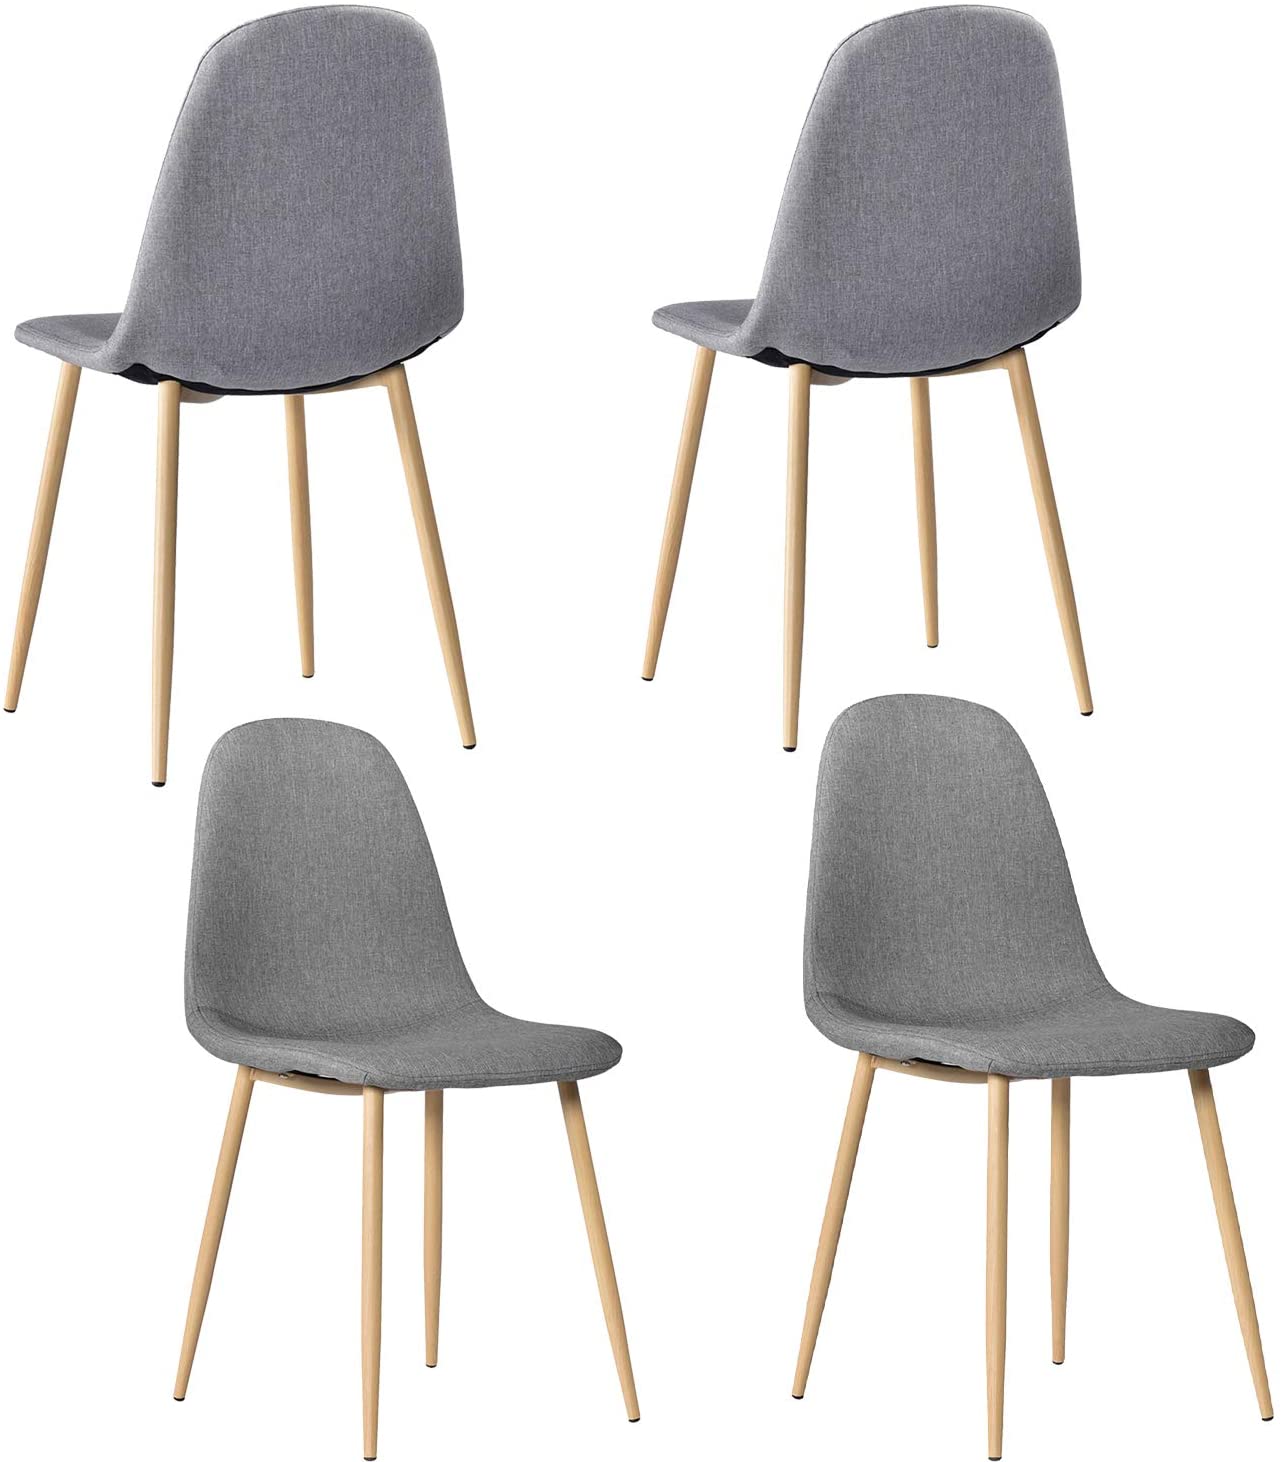 B07ZT8672K 4 PCS Kitchen Dining Chairs Mid Century Modern Living Room Side Chair Soft Fabric Cushion Seat with Metal Legs Gray